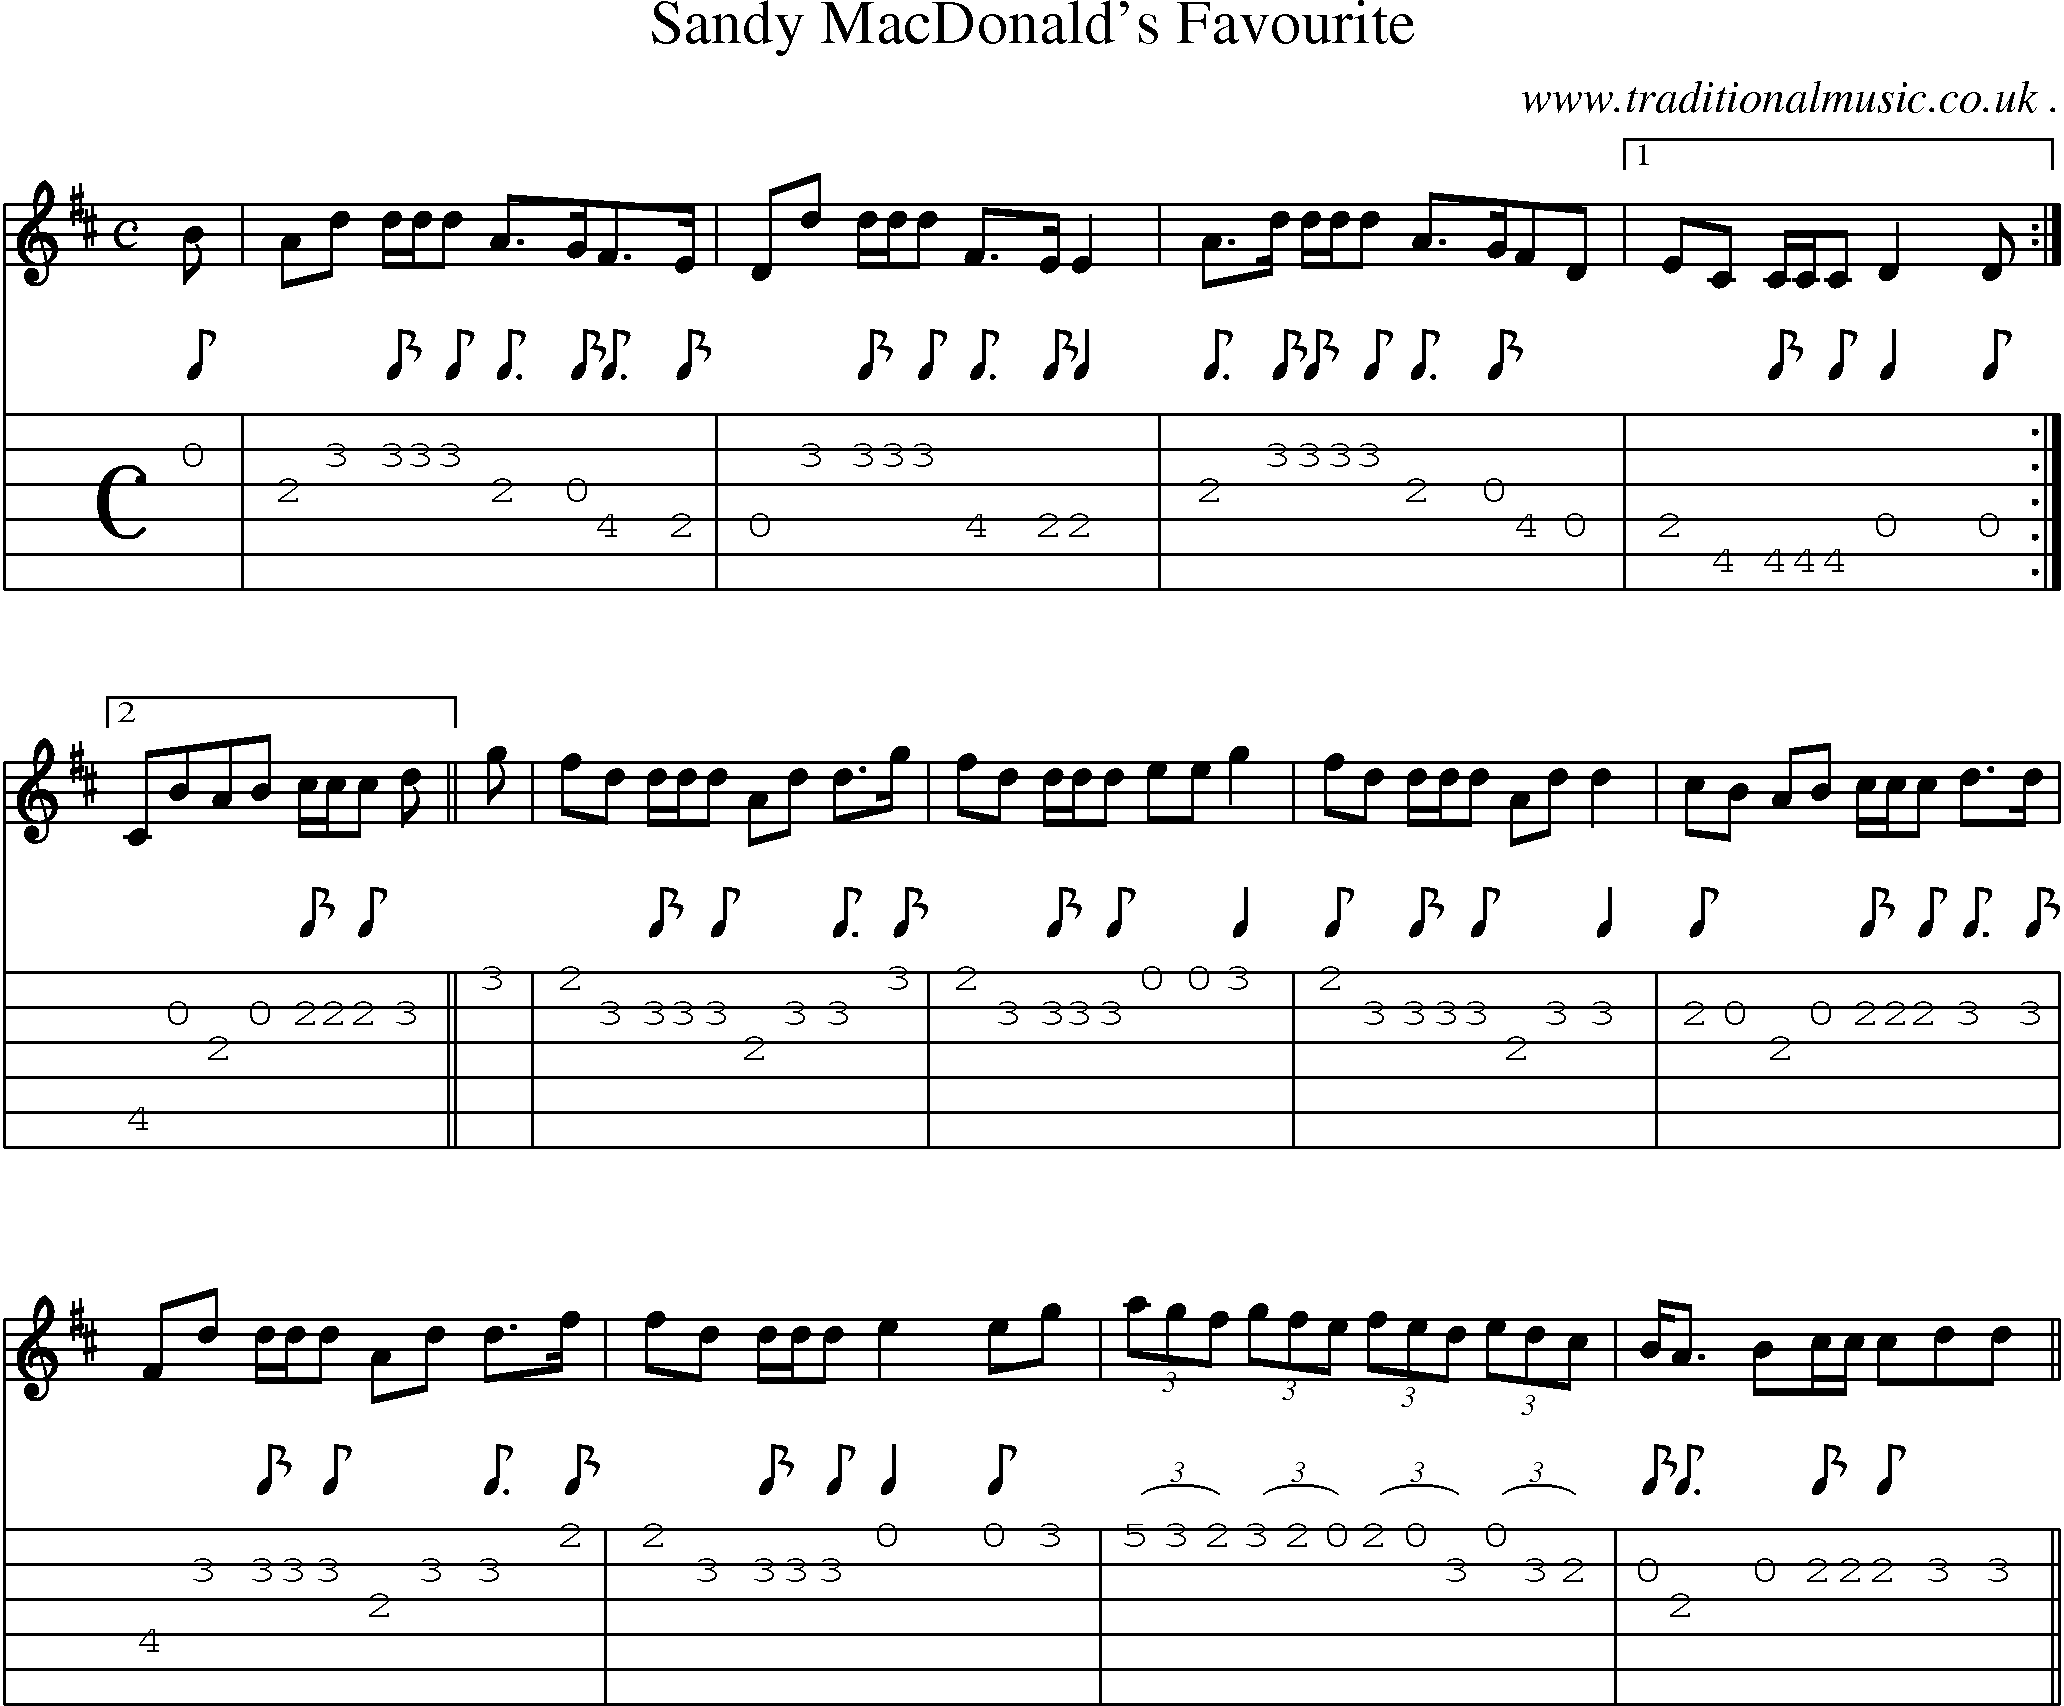 Sheet-music  score, Chords and Guitar Tabs for Sandy Macdonalds Favourite